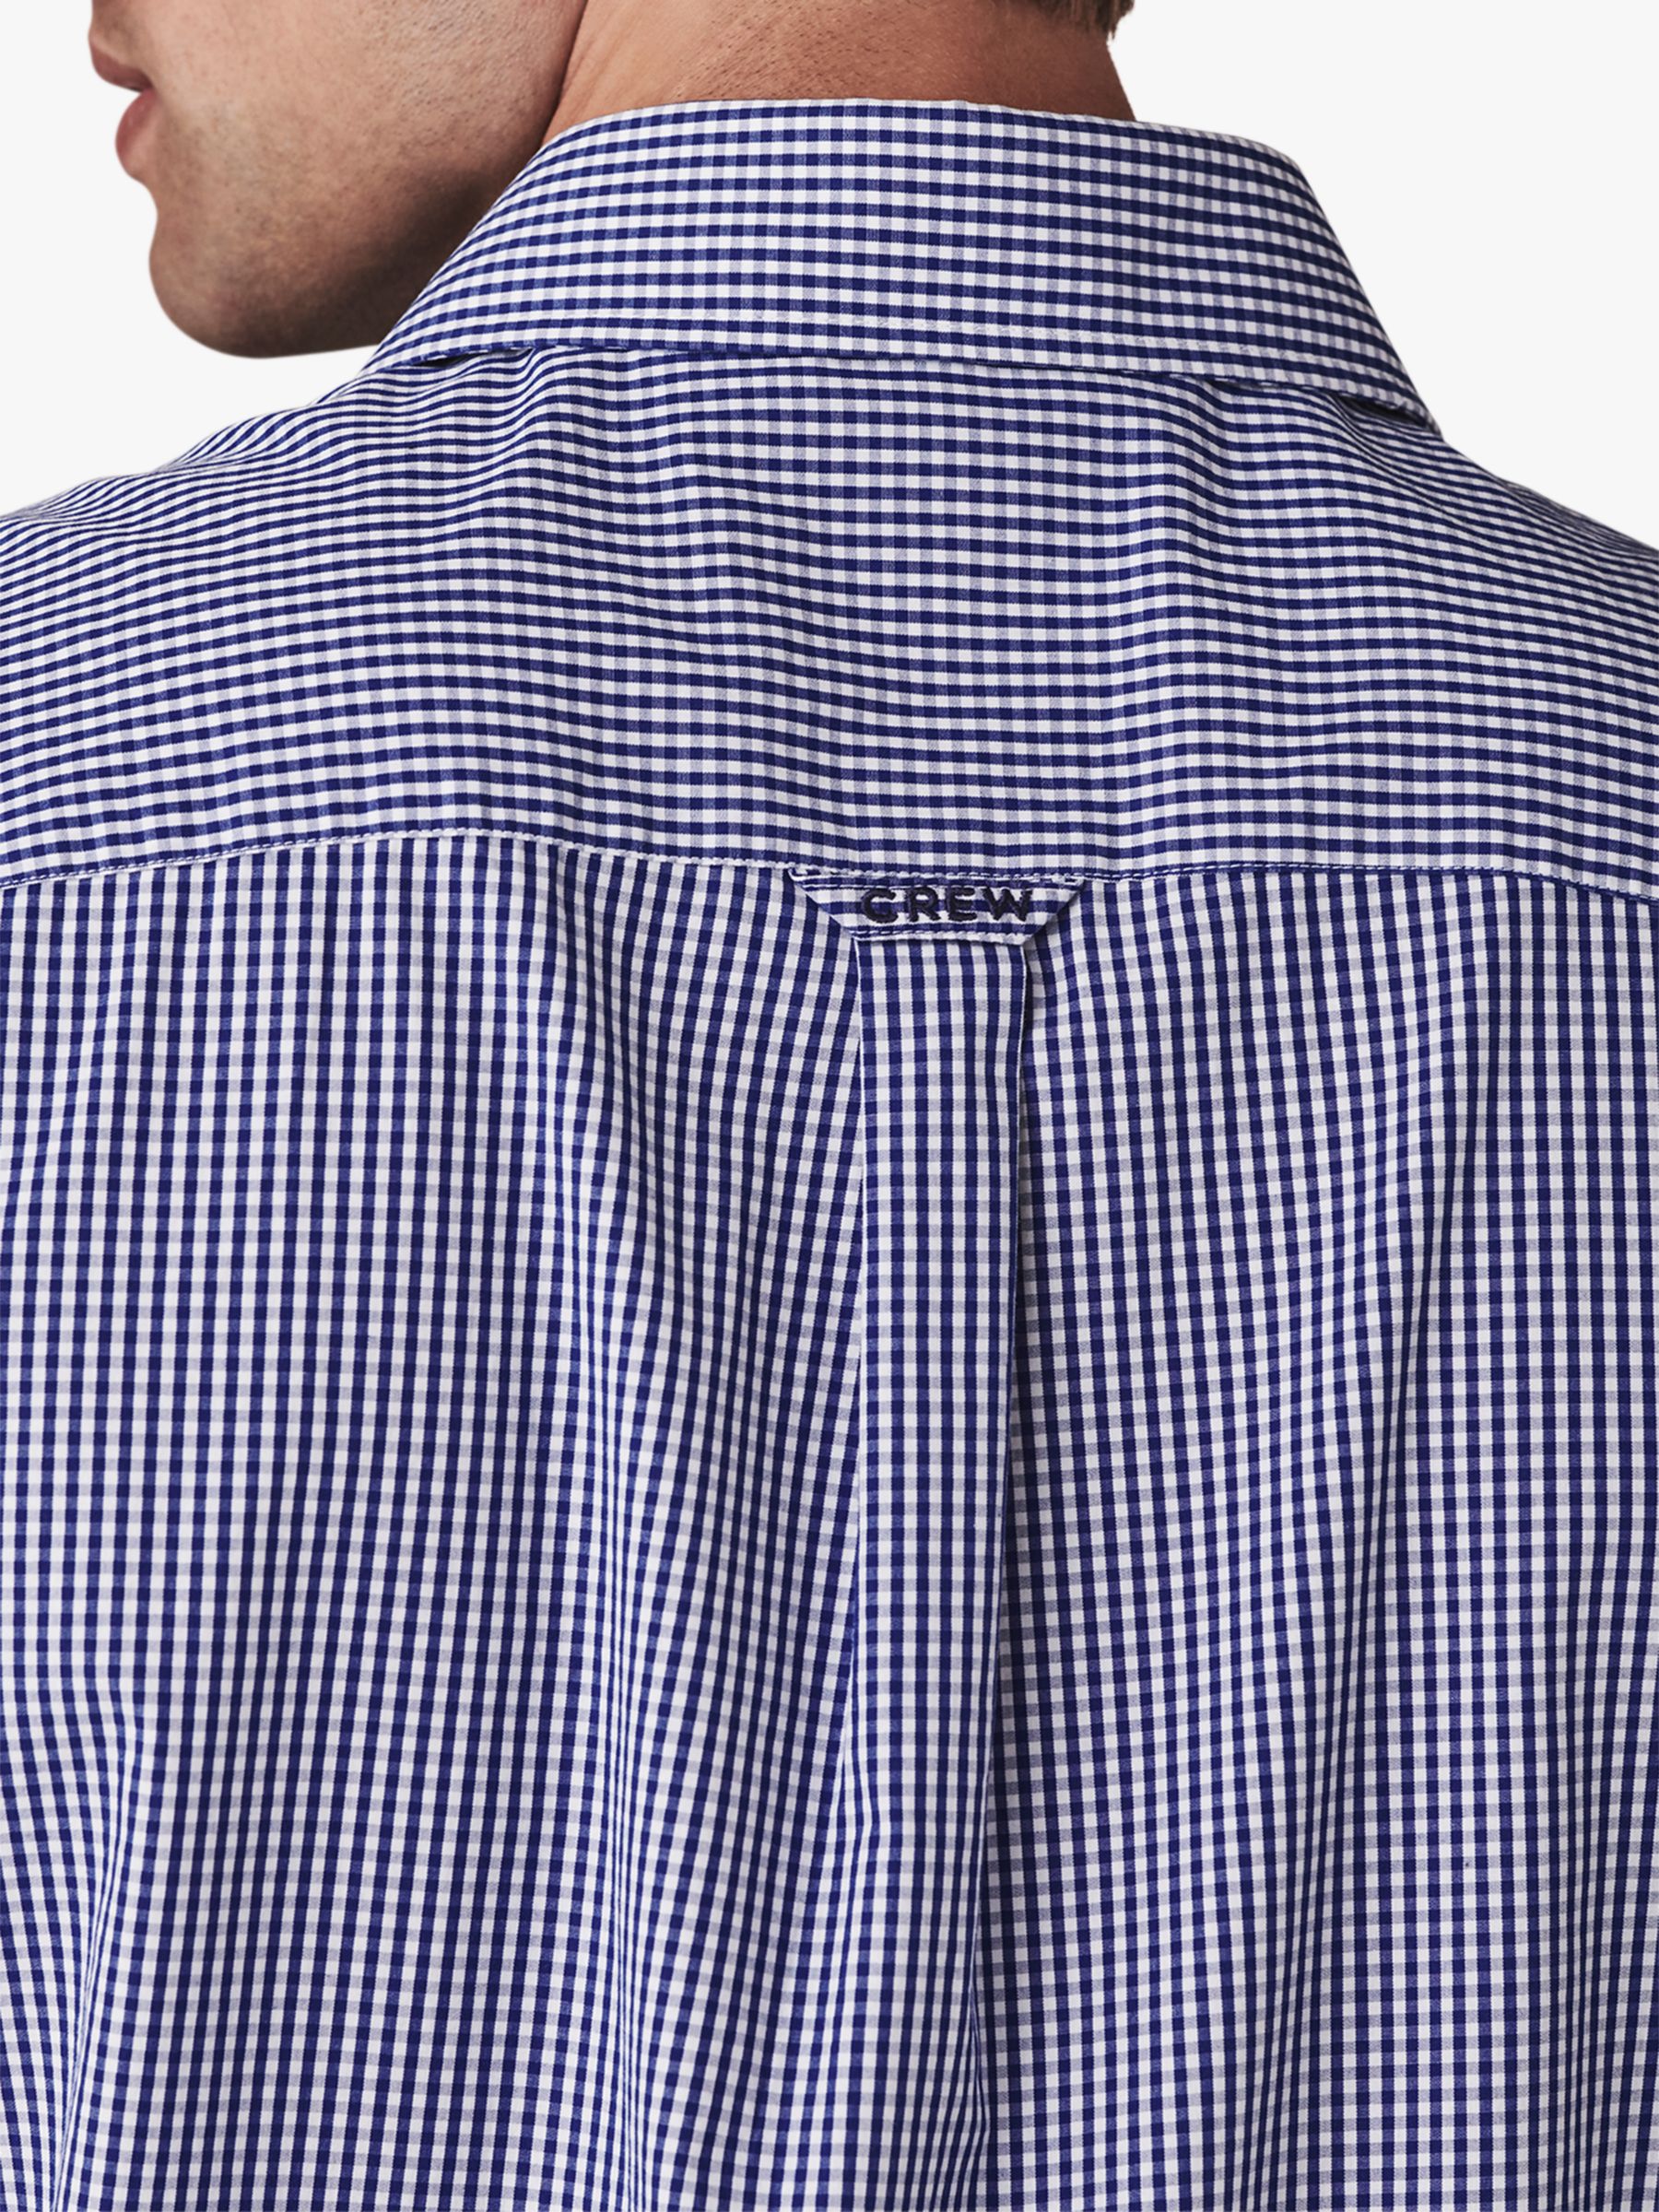 Buy Crew Clothing Classic Micro Gingham Check Shirt Online at johnlewis.com